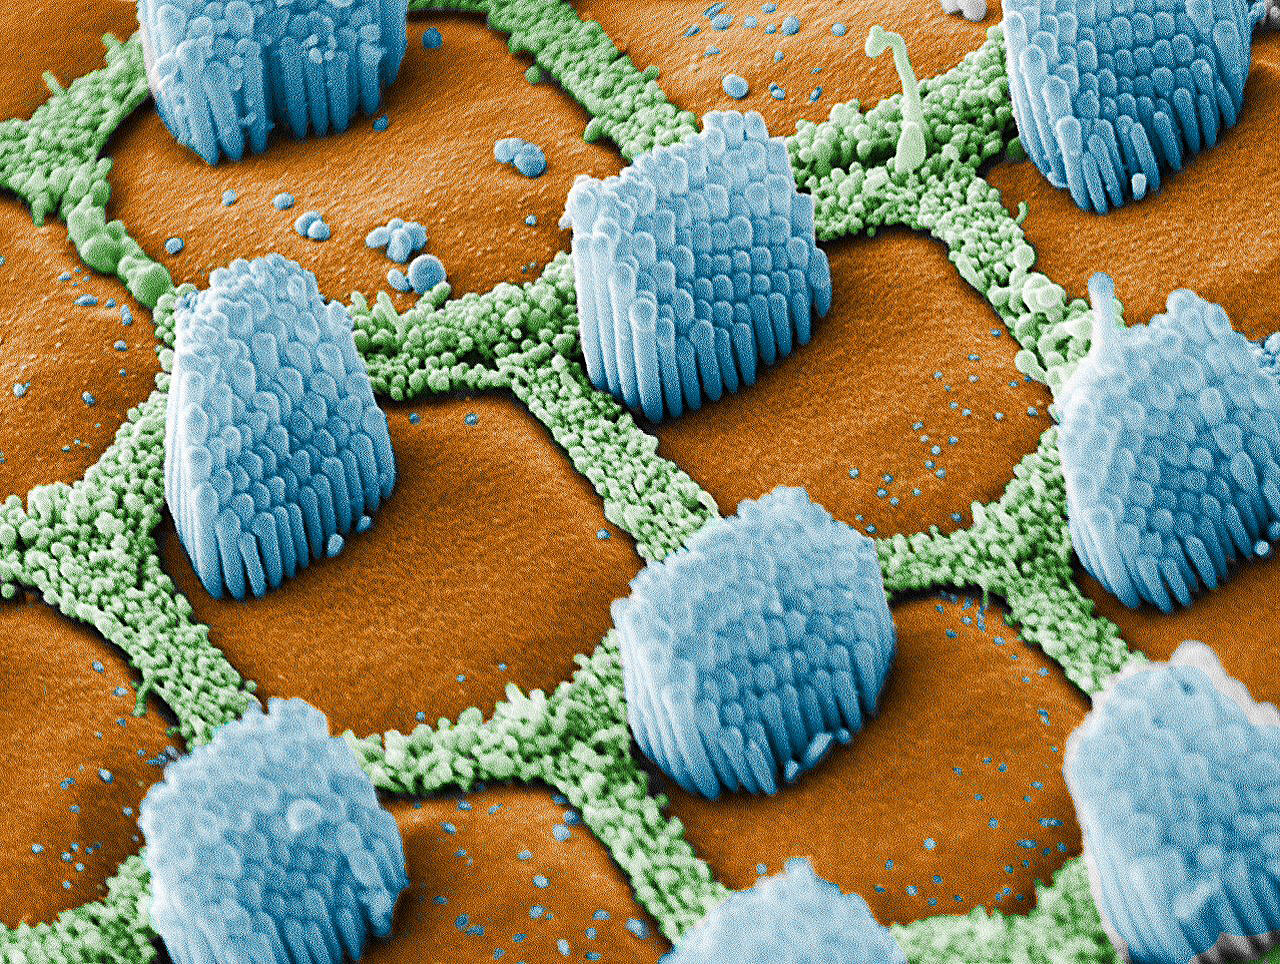 Colorized microgram of the hair cells